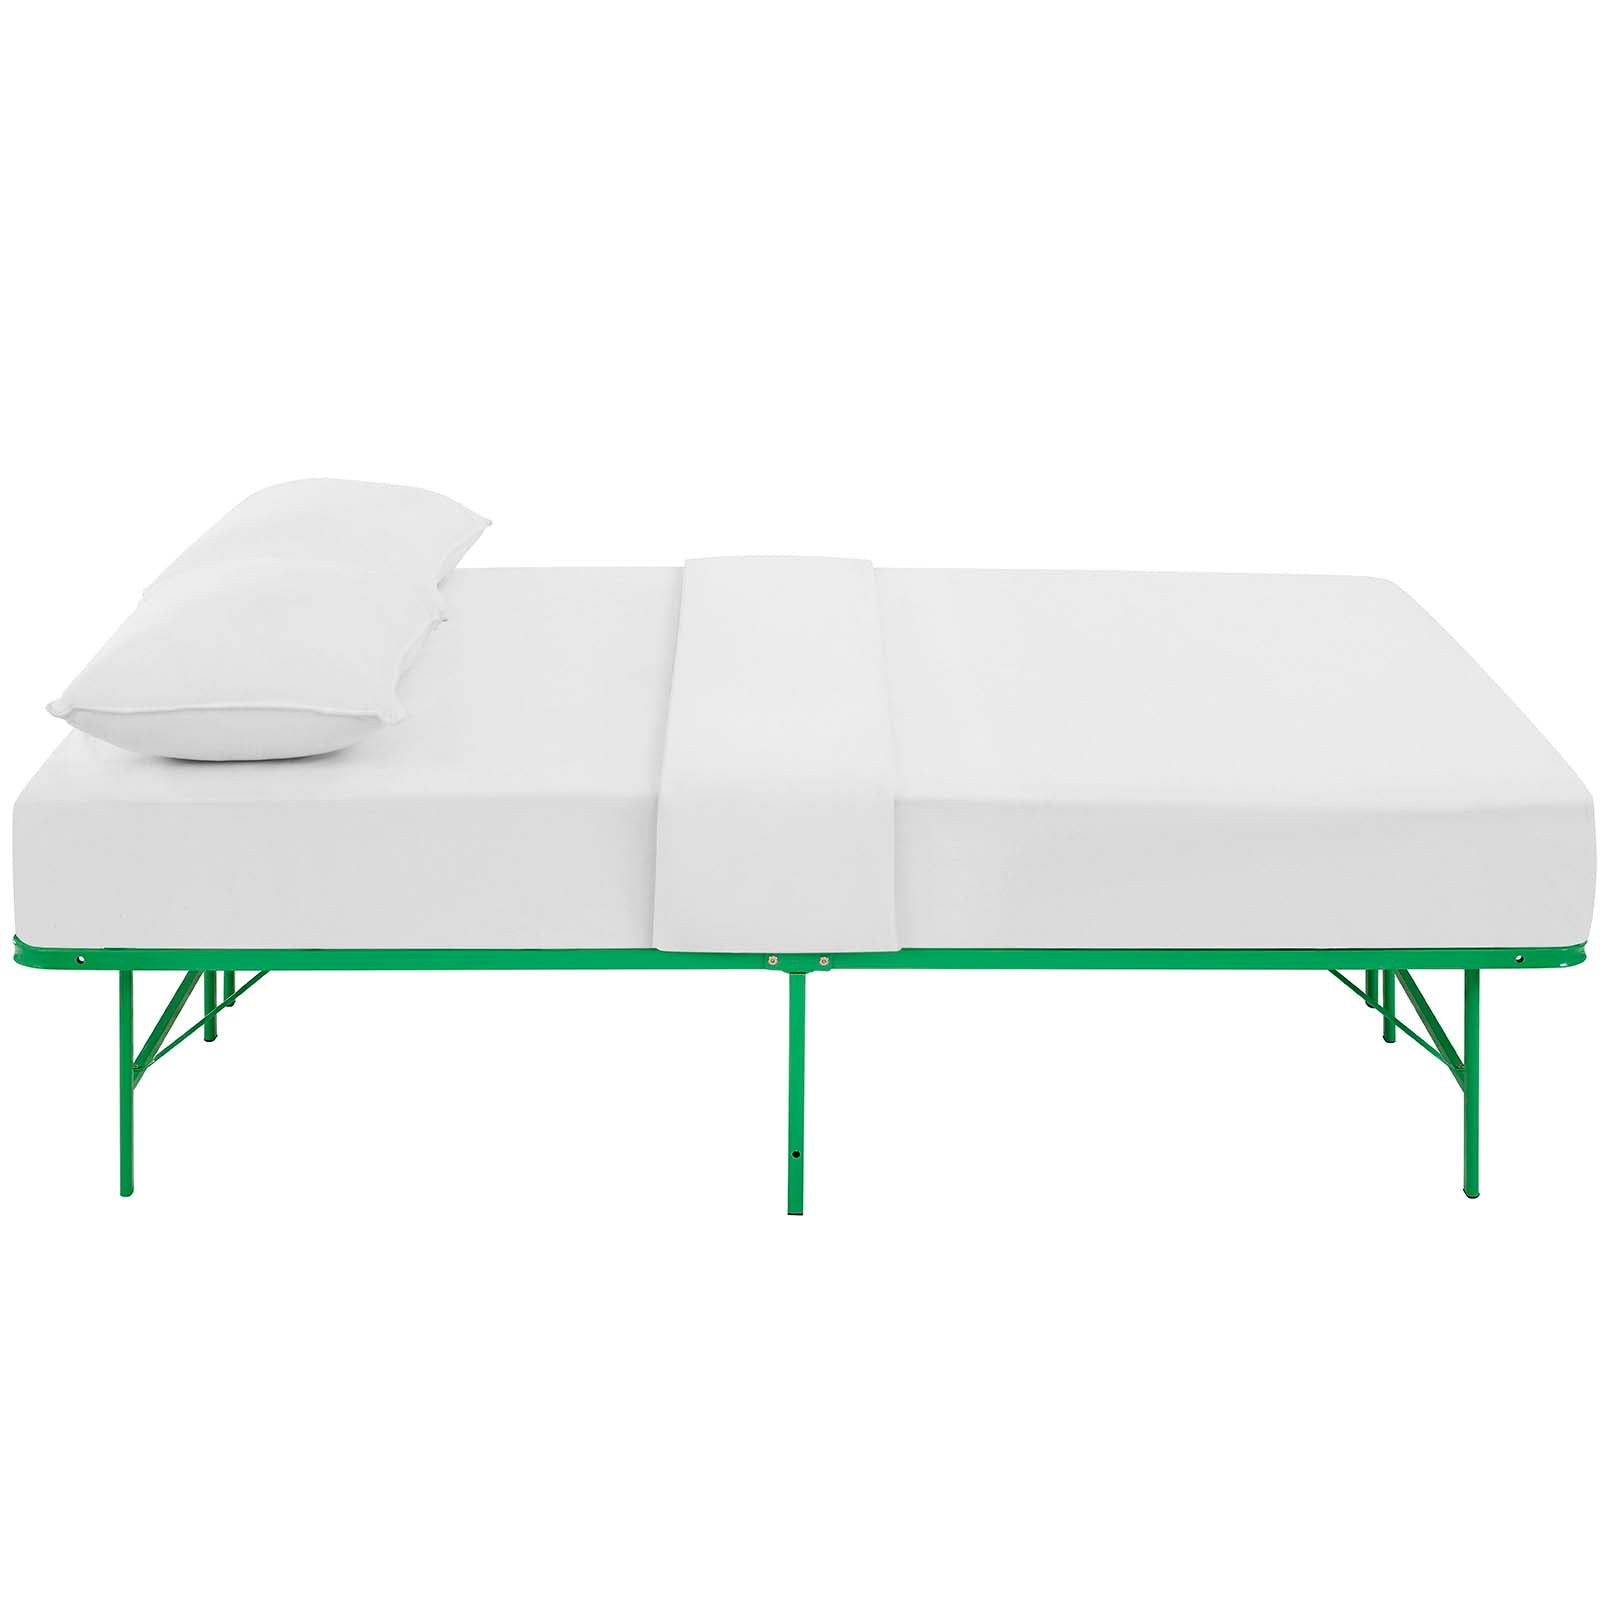 Modway Beds - Horizon Full Stainless Steel Bed Frame Green